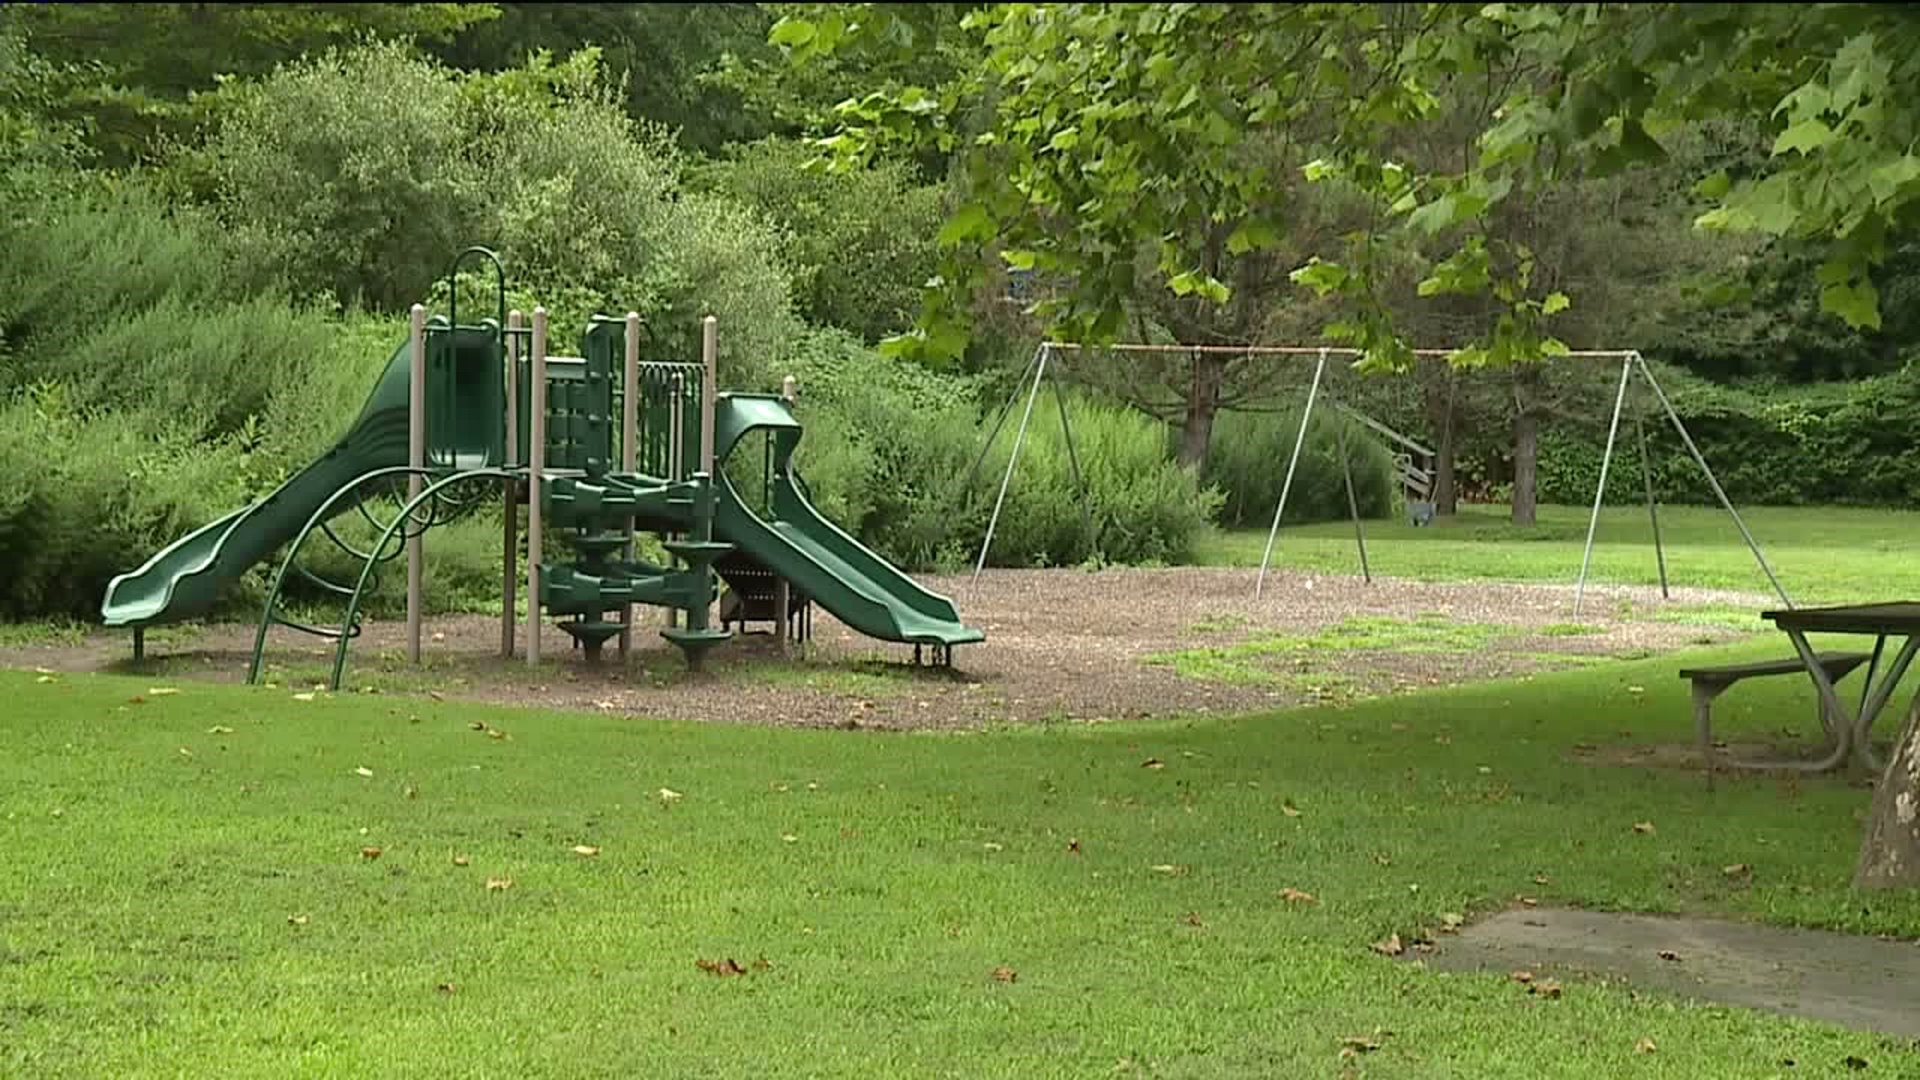 Township to add armed security at park to stop people from breaking the law